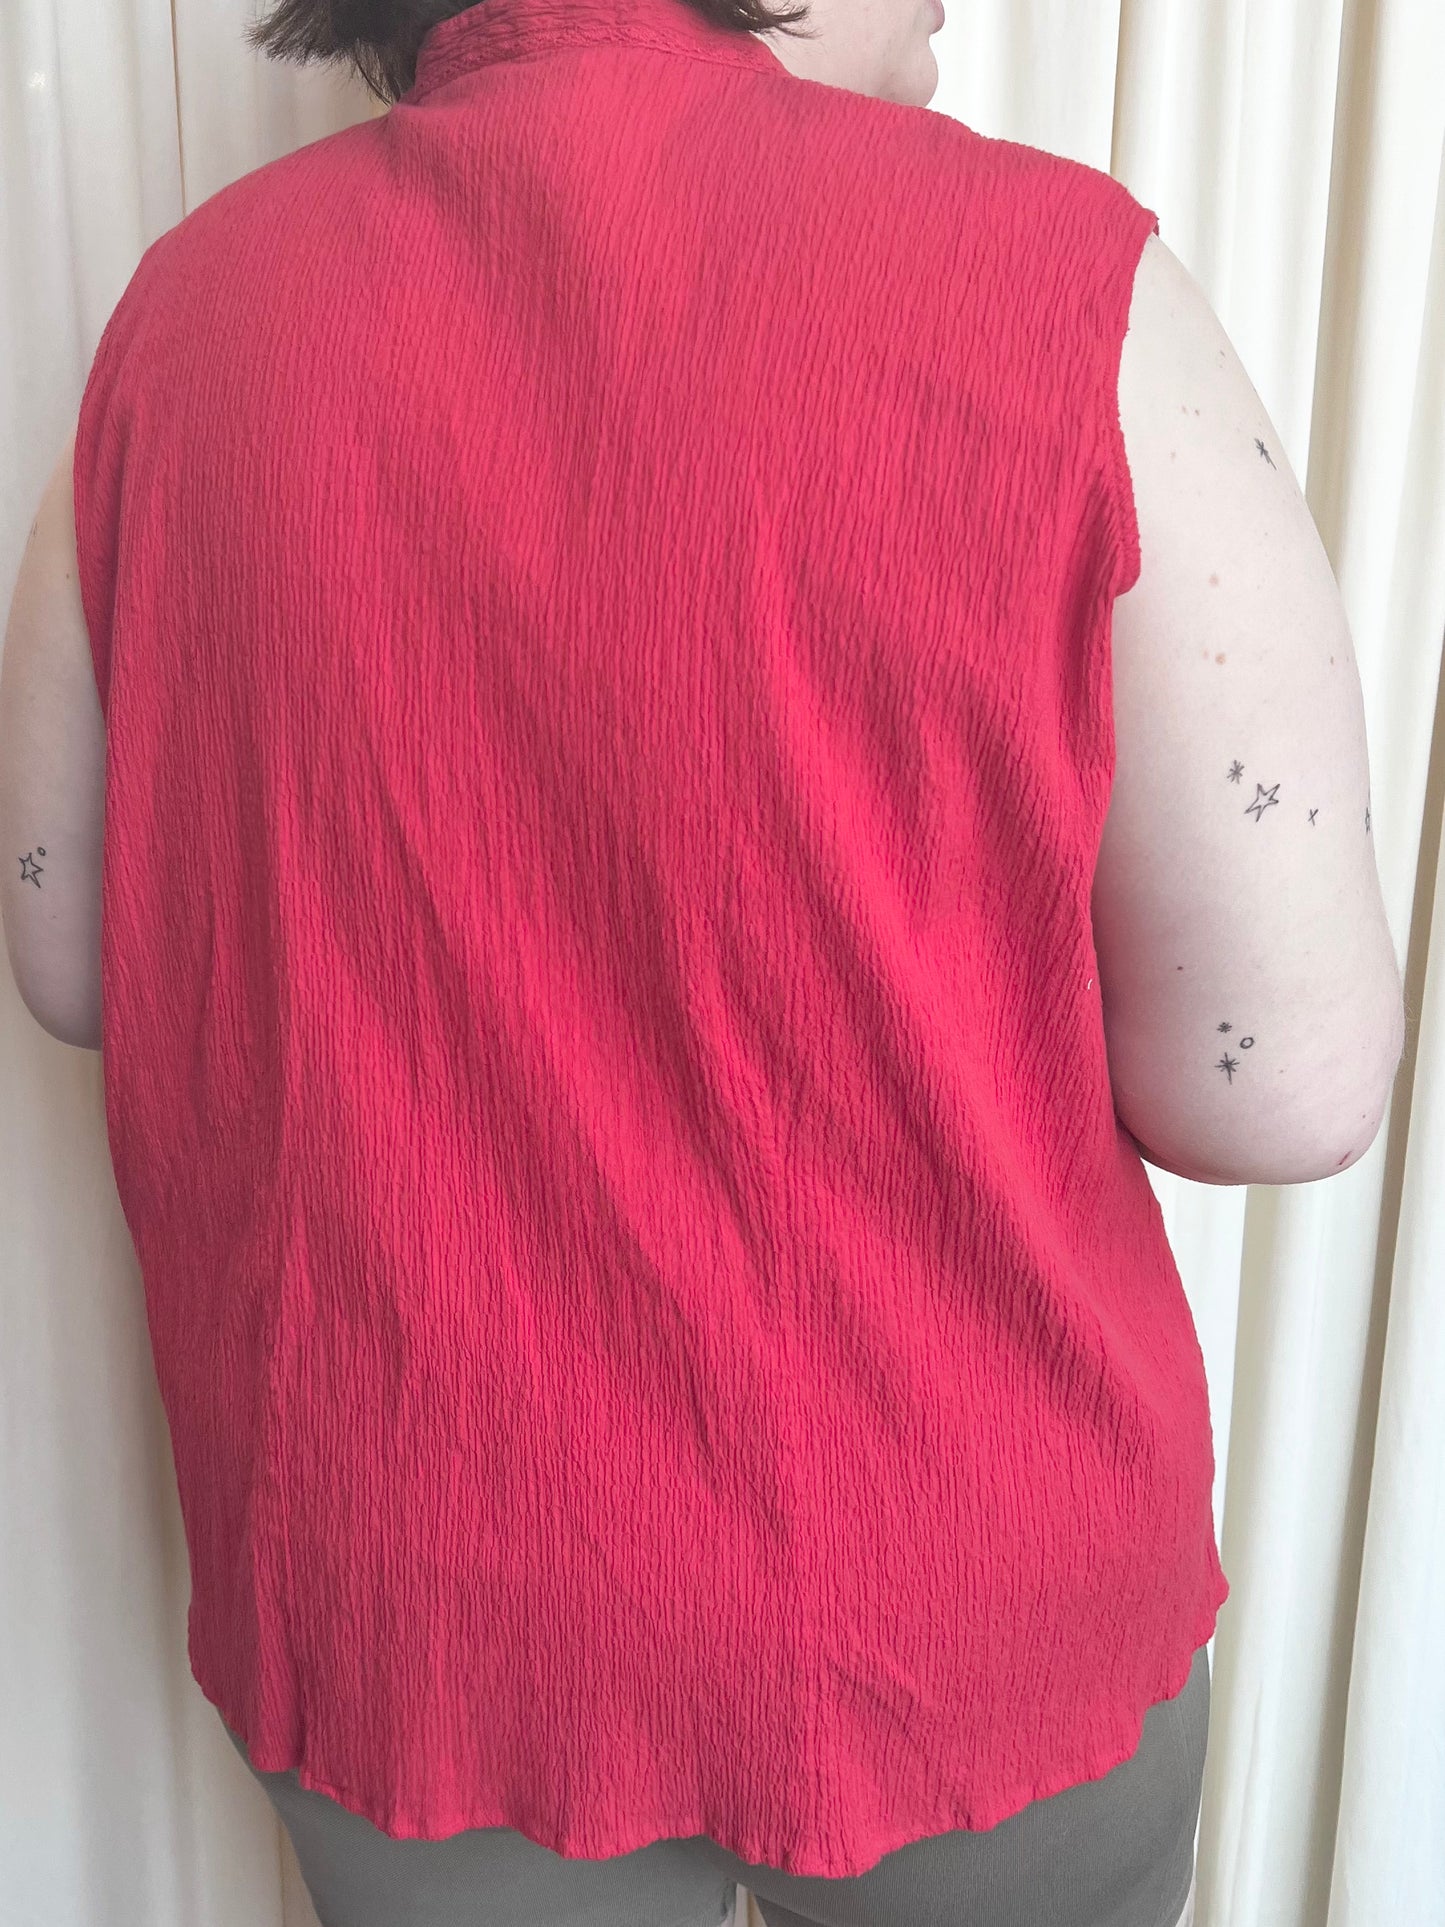 Vintage Red Textured Tank - 3X-Large